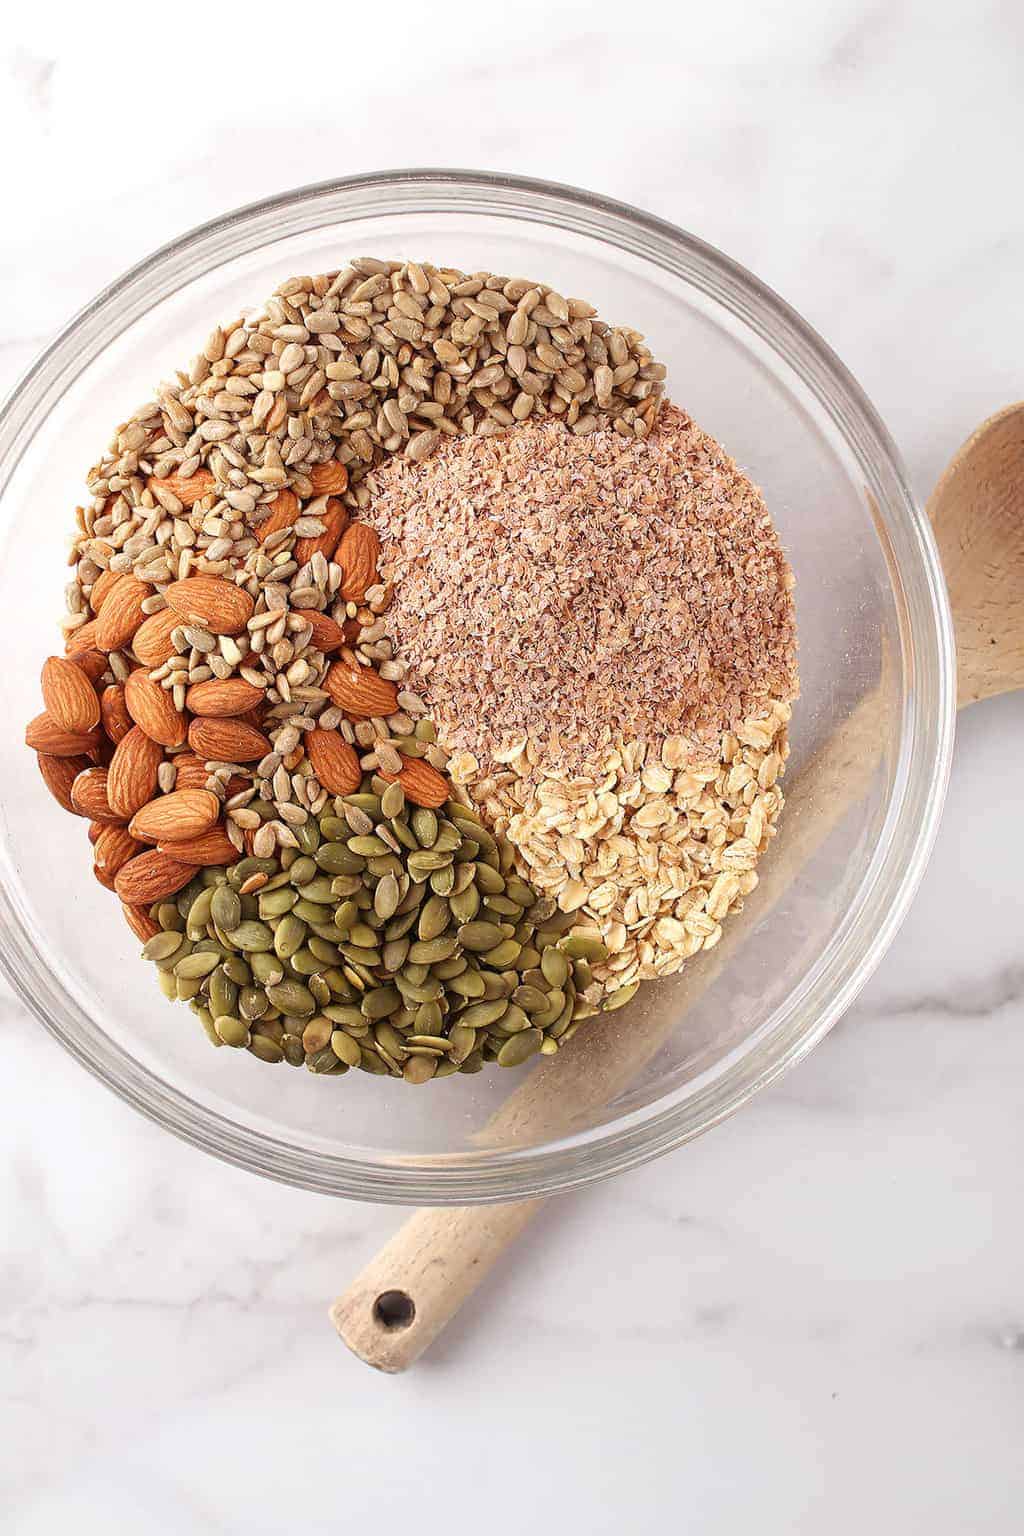 Oats, seeds, and nuts in a mixing bowl